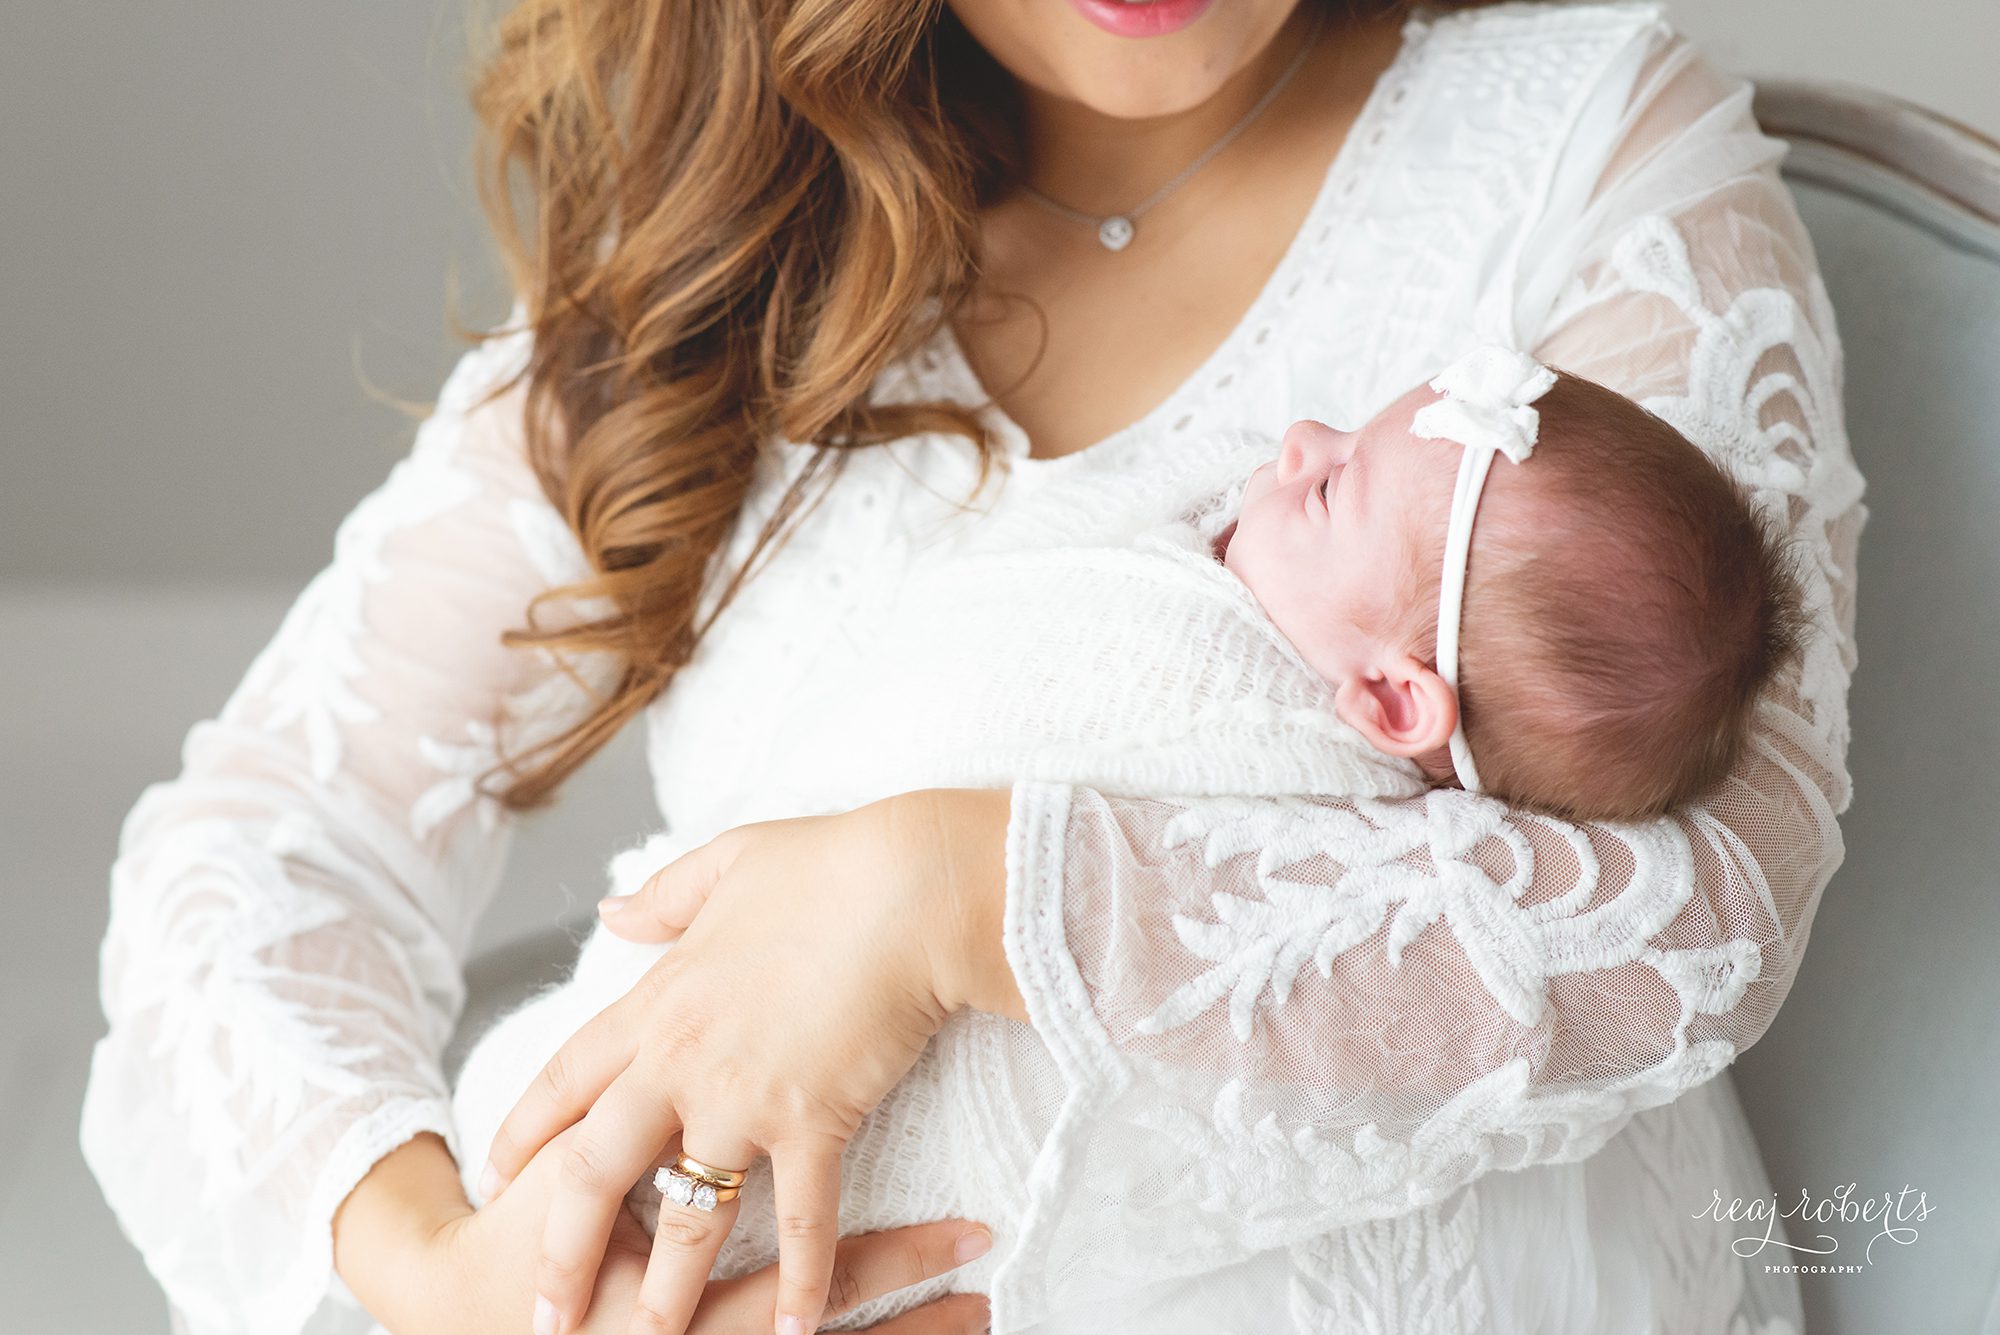 newborn swaddled held in mother's arms natural simple organic timeless newborn photos | Phoenix Newborn Photographer | Reaj Roberts Photography